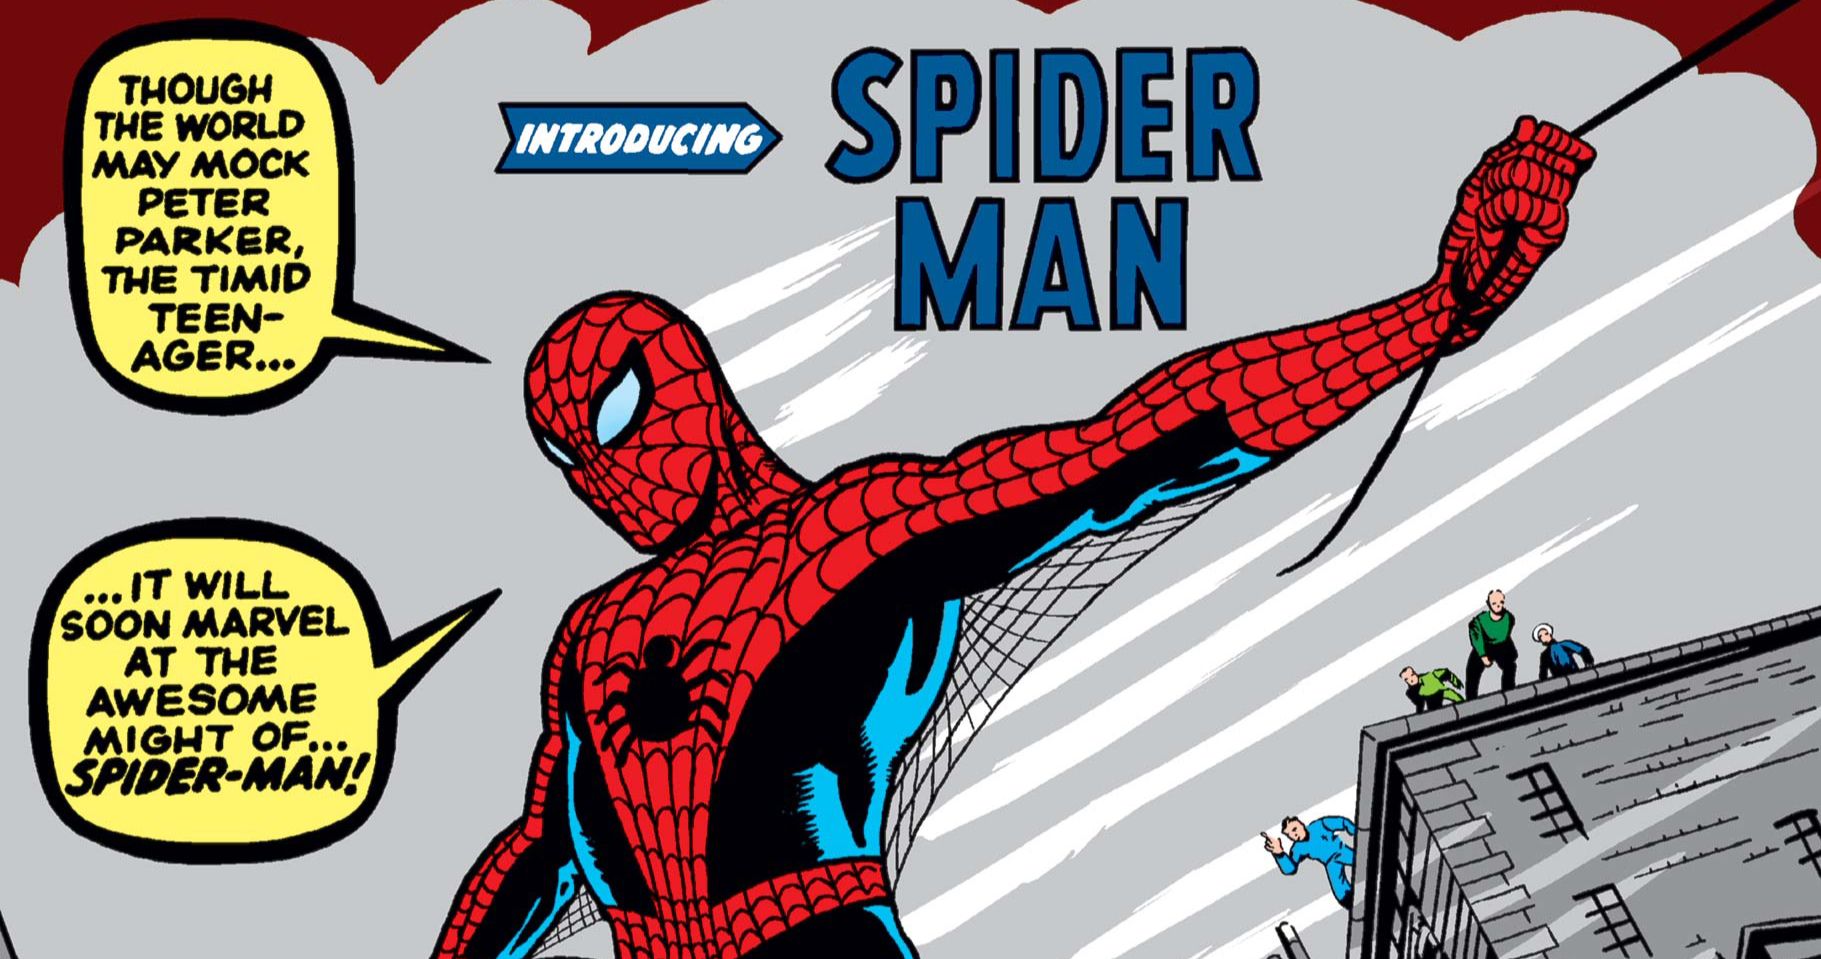 Spider-Man Sets New Comic Book Record as Amazing Fantasy #15 Sells for $3.6 Million